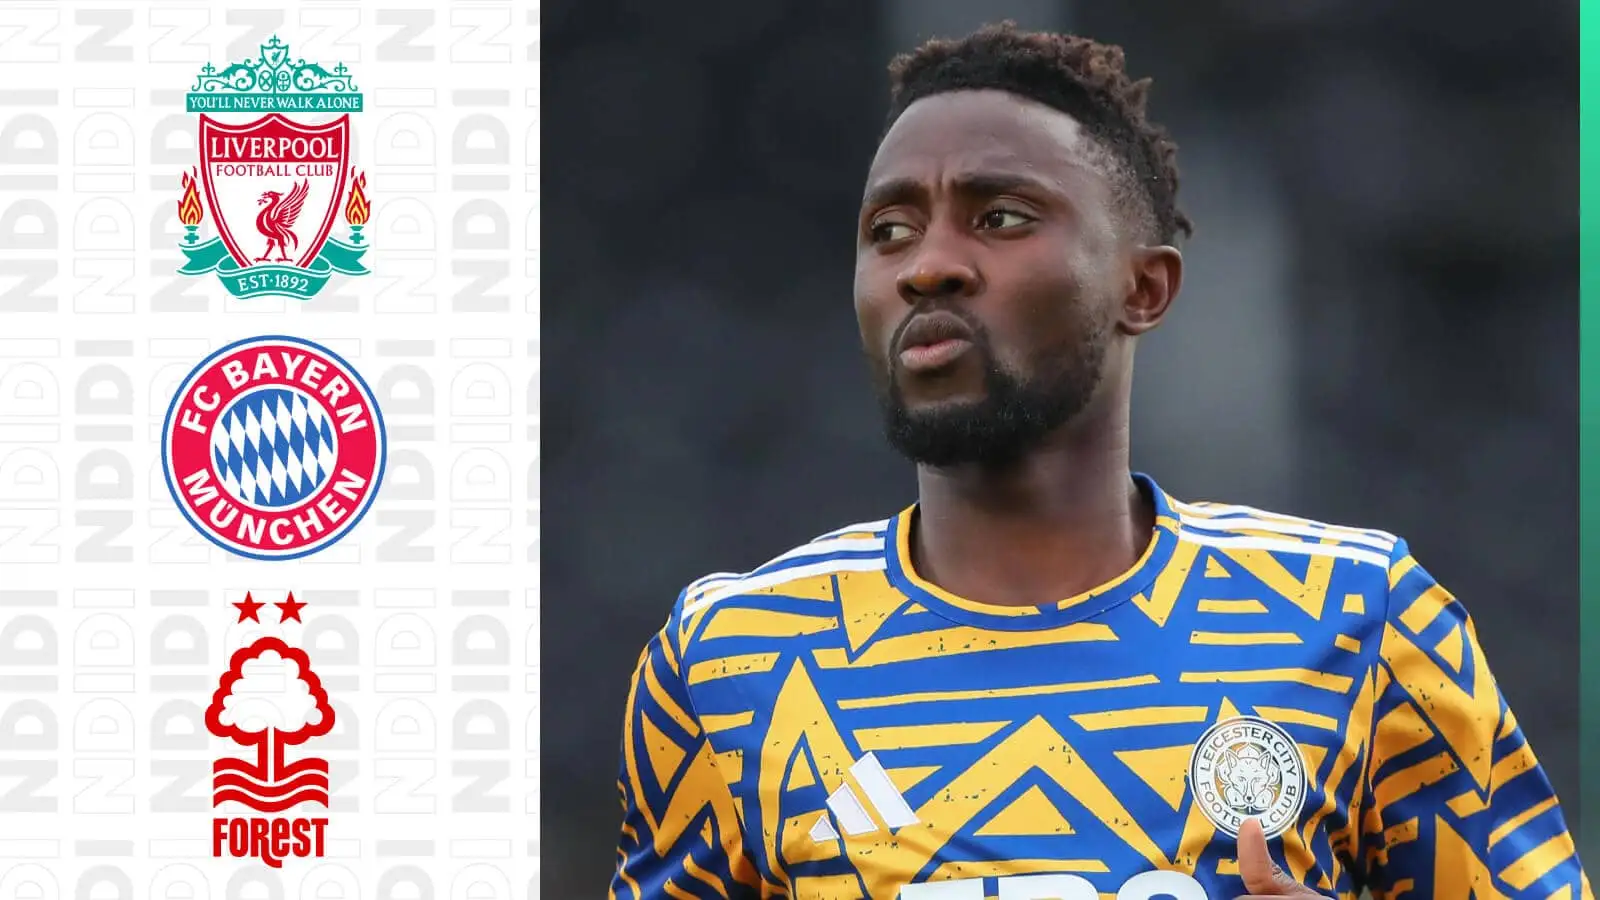 Wilfred Ndidi next to the Liverpool, Bayern Munich and Nottingham Forest badges